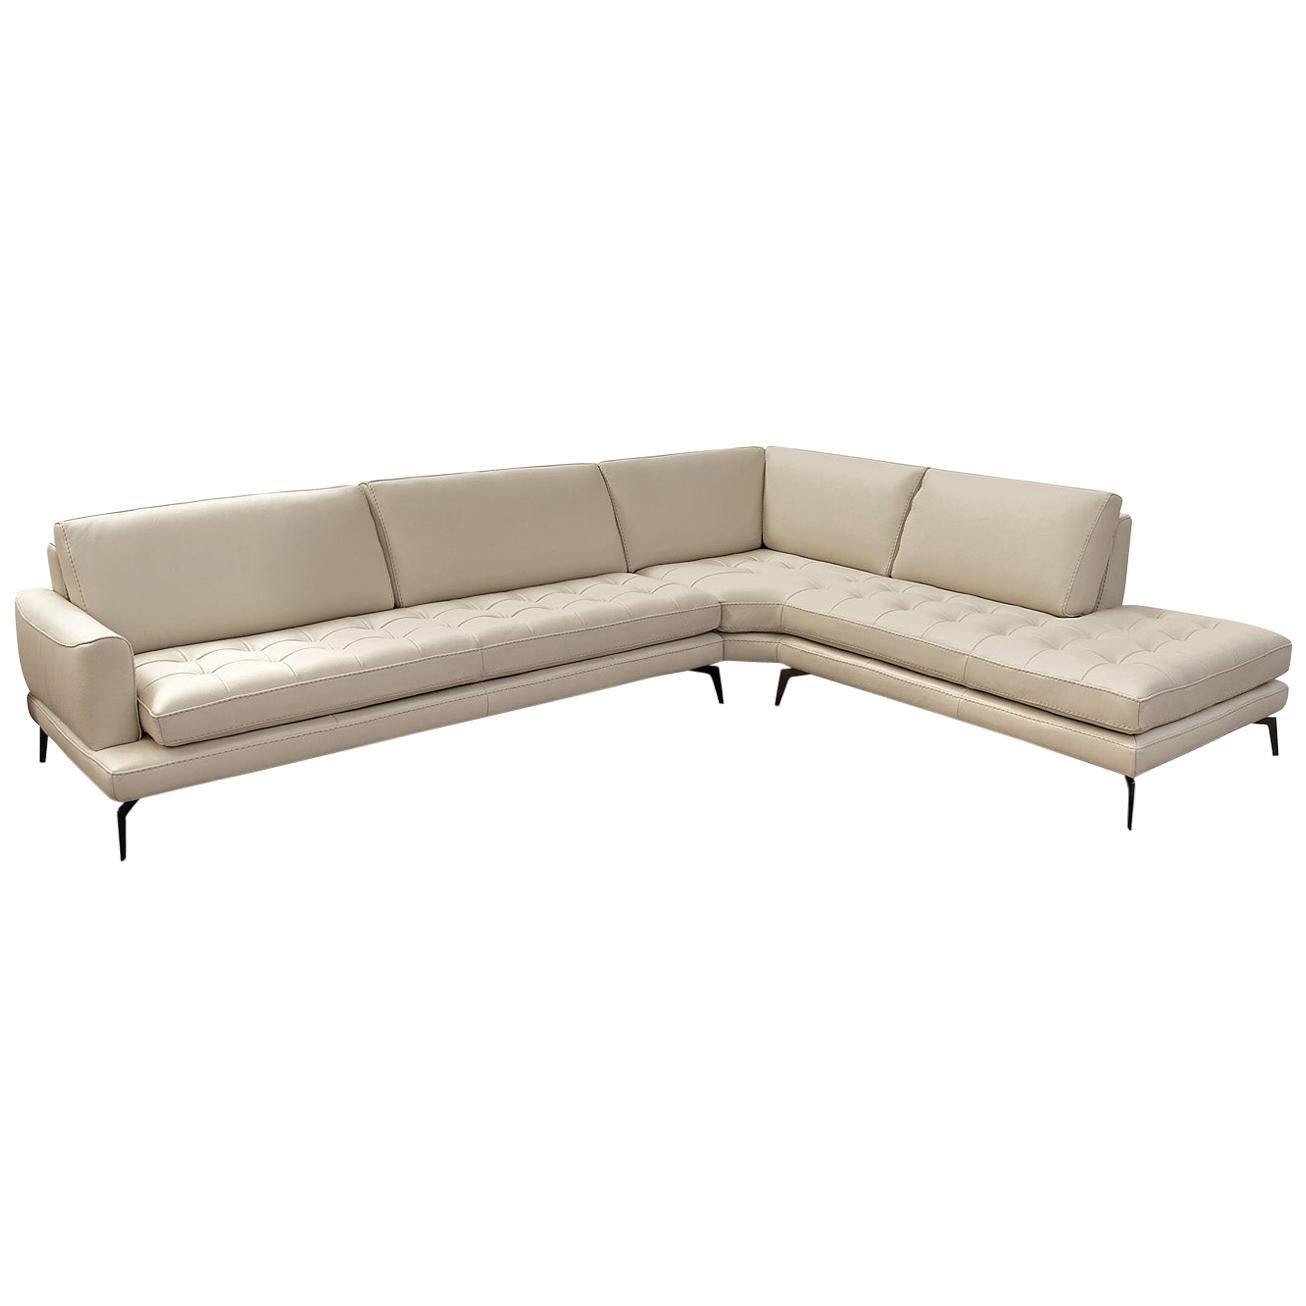 Lifetime Italian Leather Sectional Chaise Tufting Tone on Tone Stitching For Sale